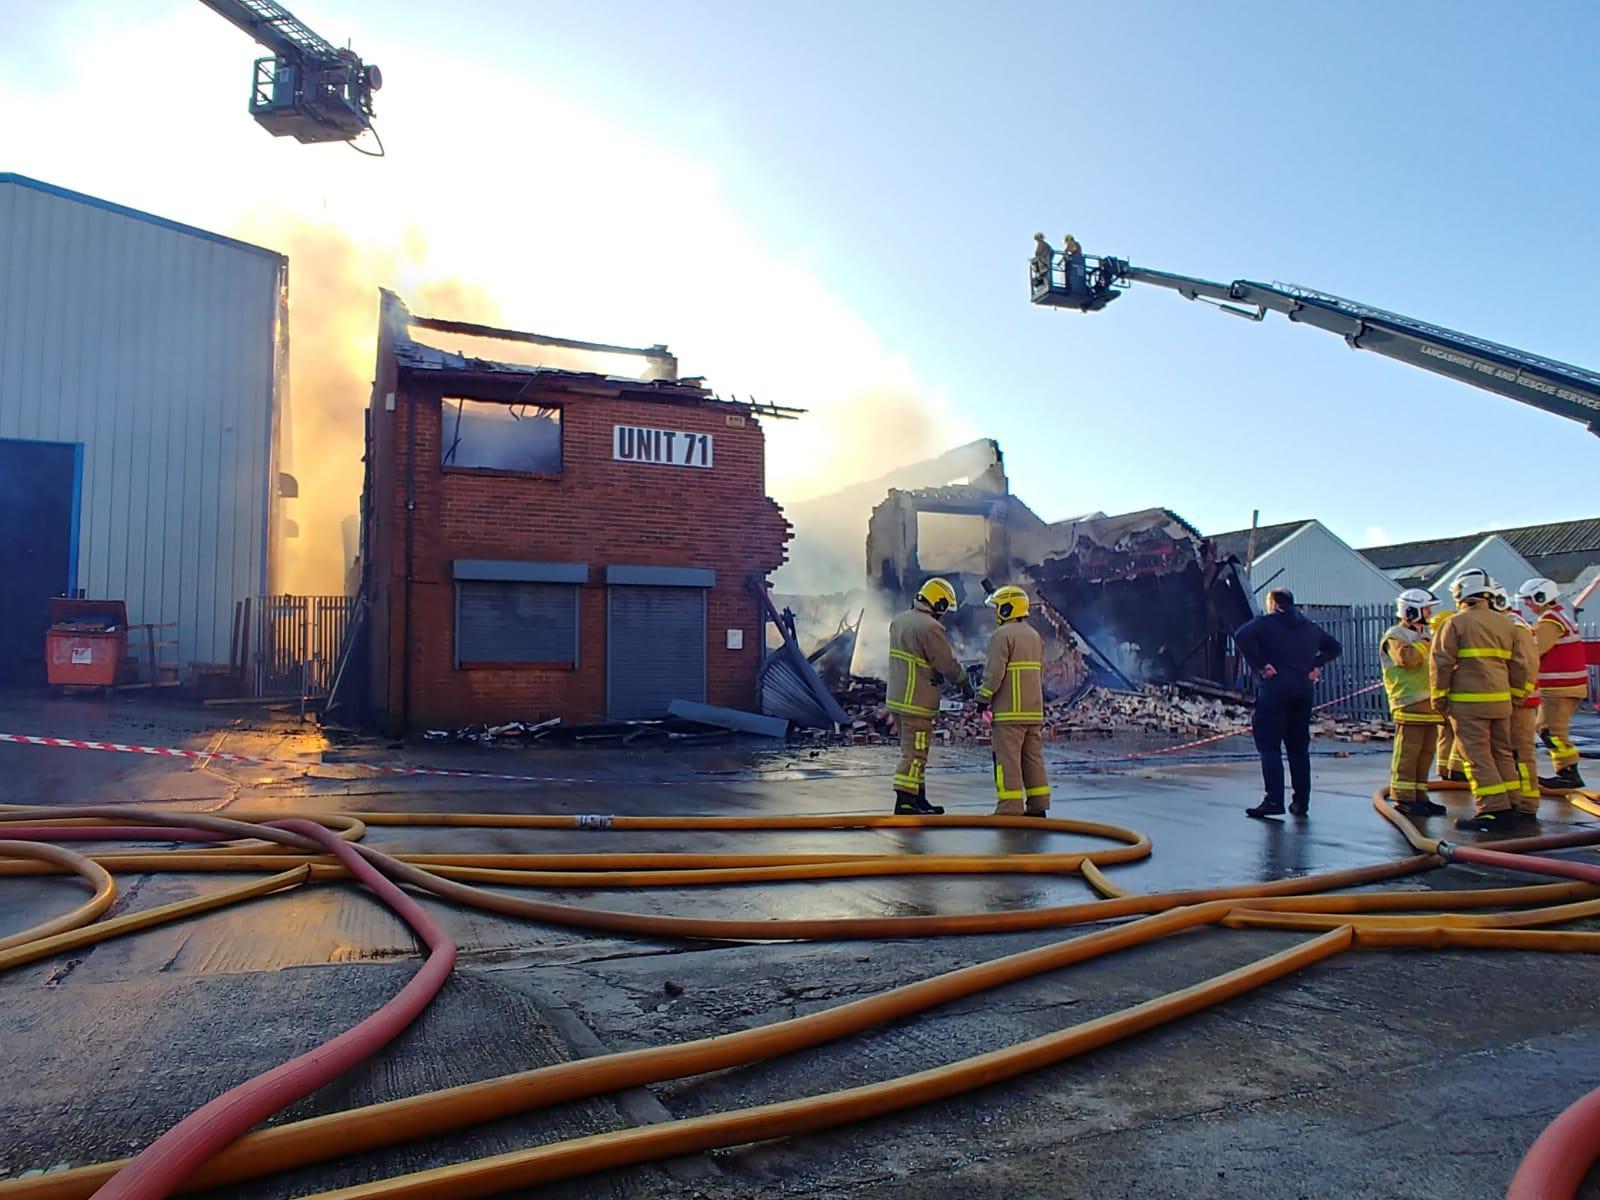 The fire has destroyed unit 71 in Cowley Road, at an industrial park off Vicarage Lane in Marton this morning (March 2)